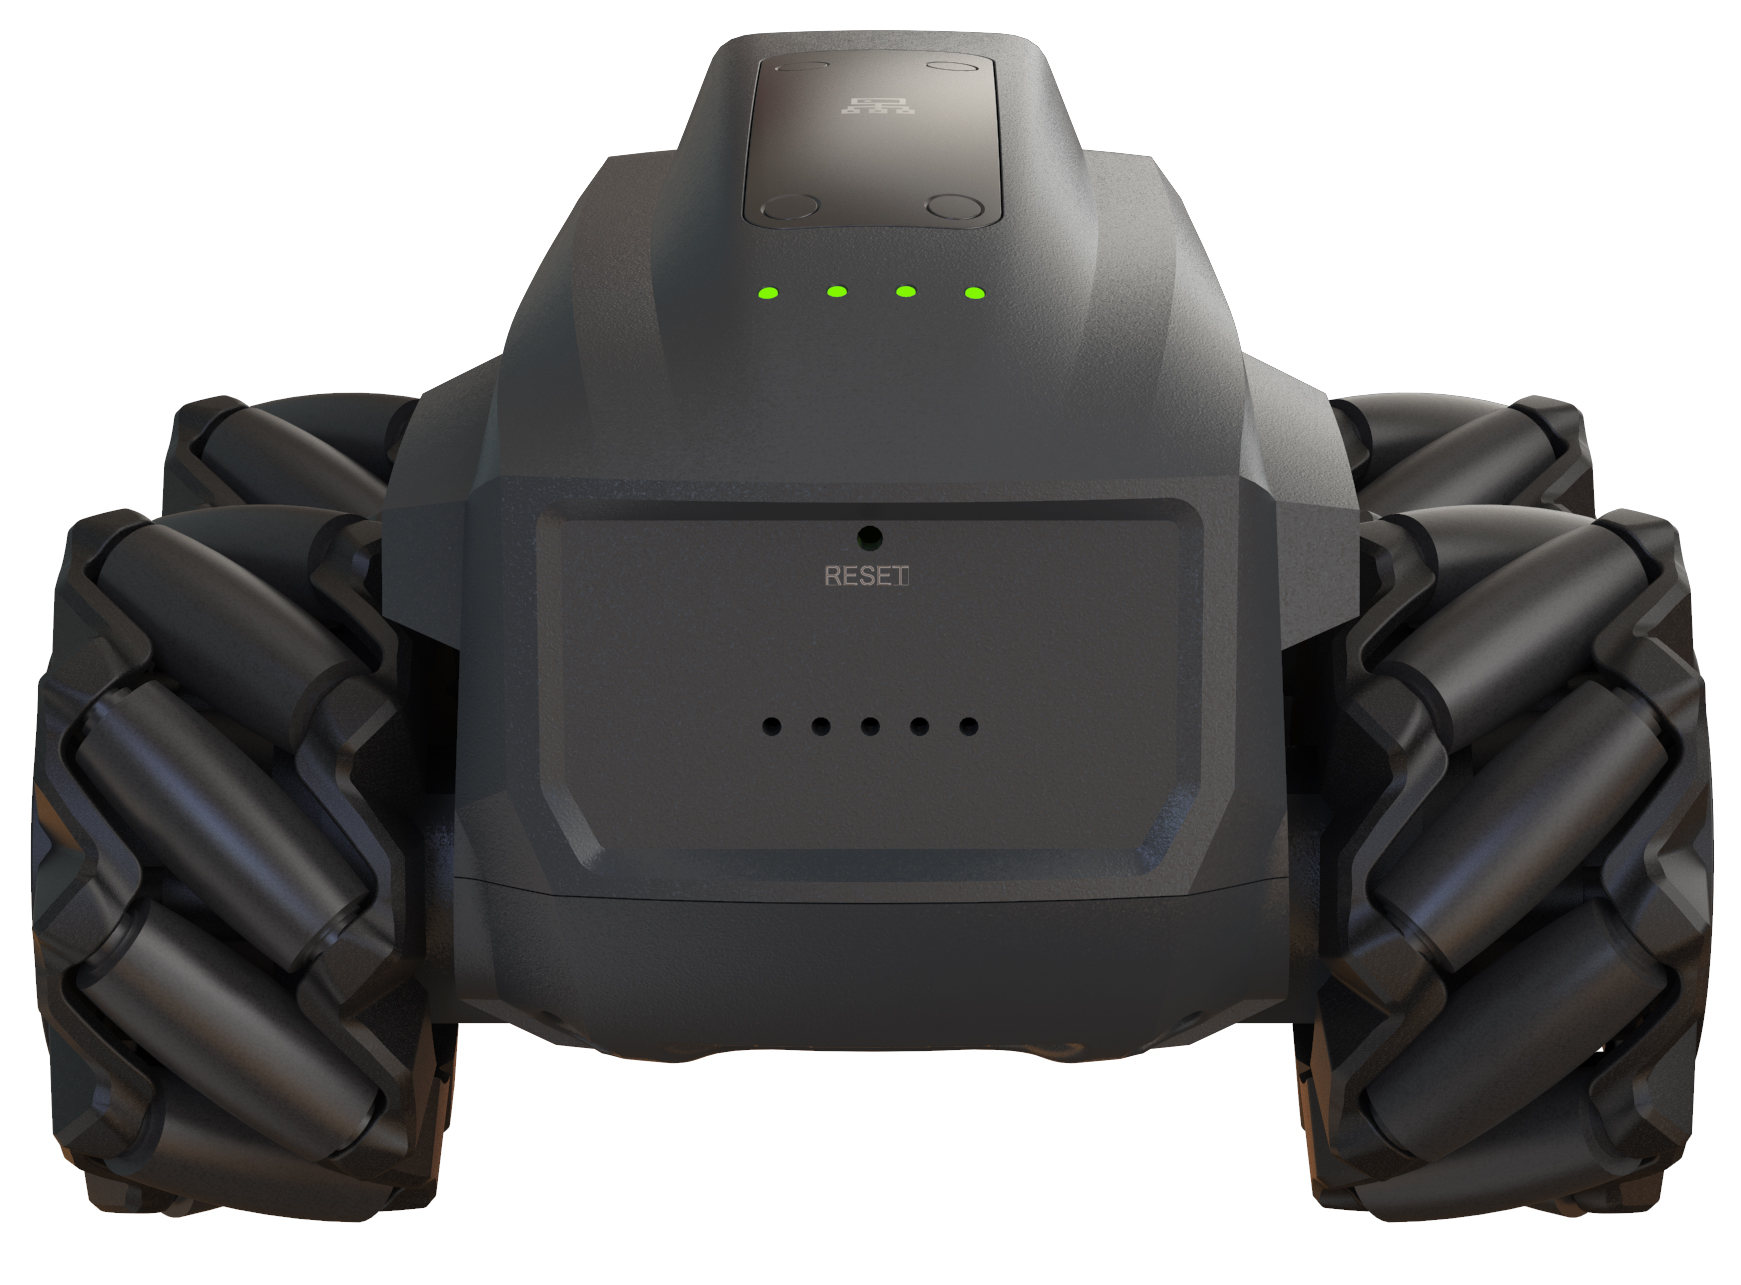 Home security mobile robot for intelligent surveillance.